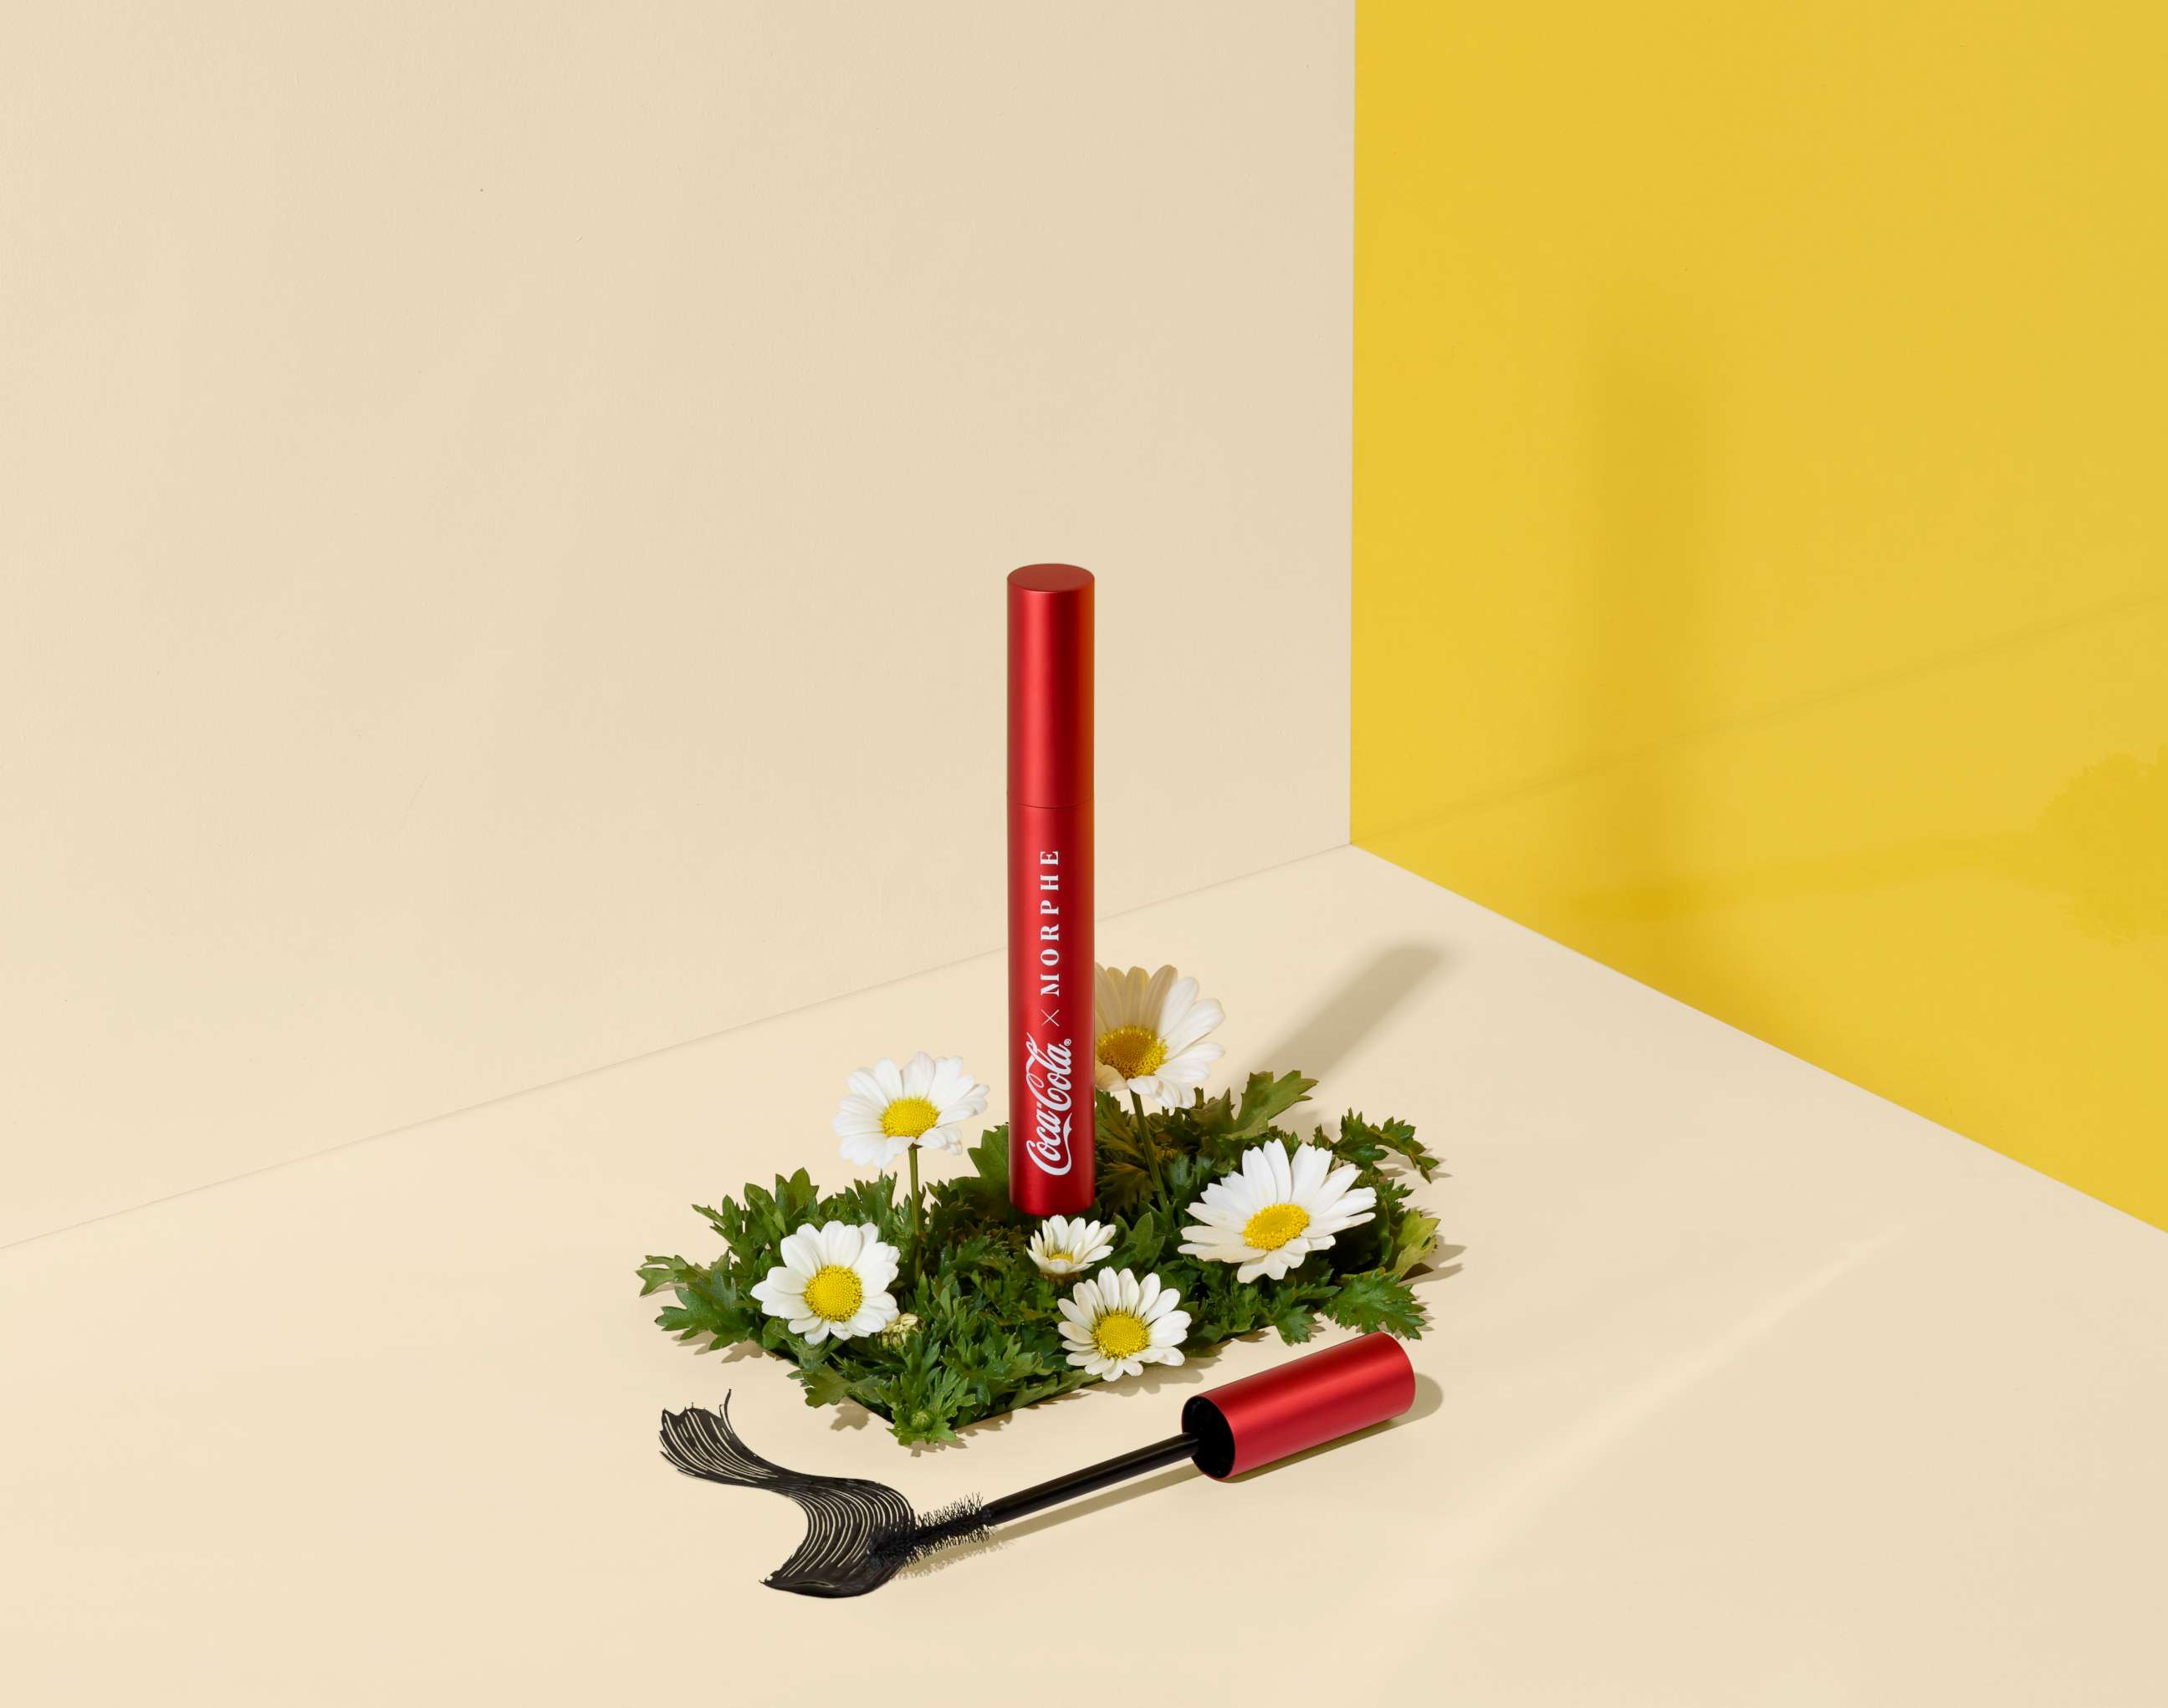 PHOTO: The "Make it Big Volumizing Mascara 1971 Edition" from the Morphe x Coca-Cola collection.